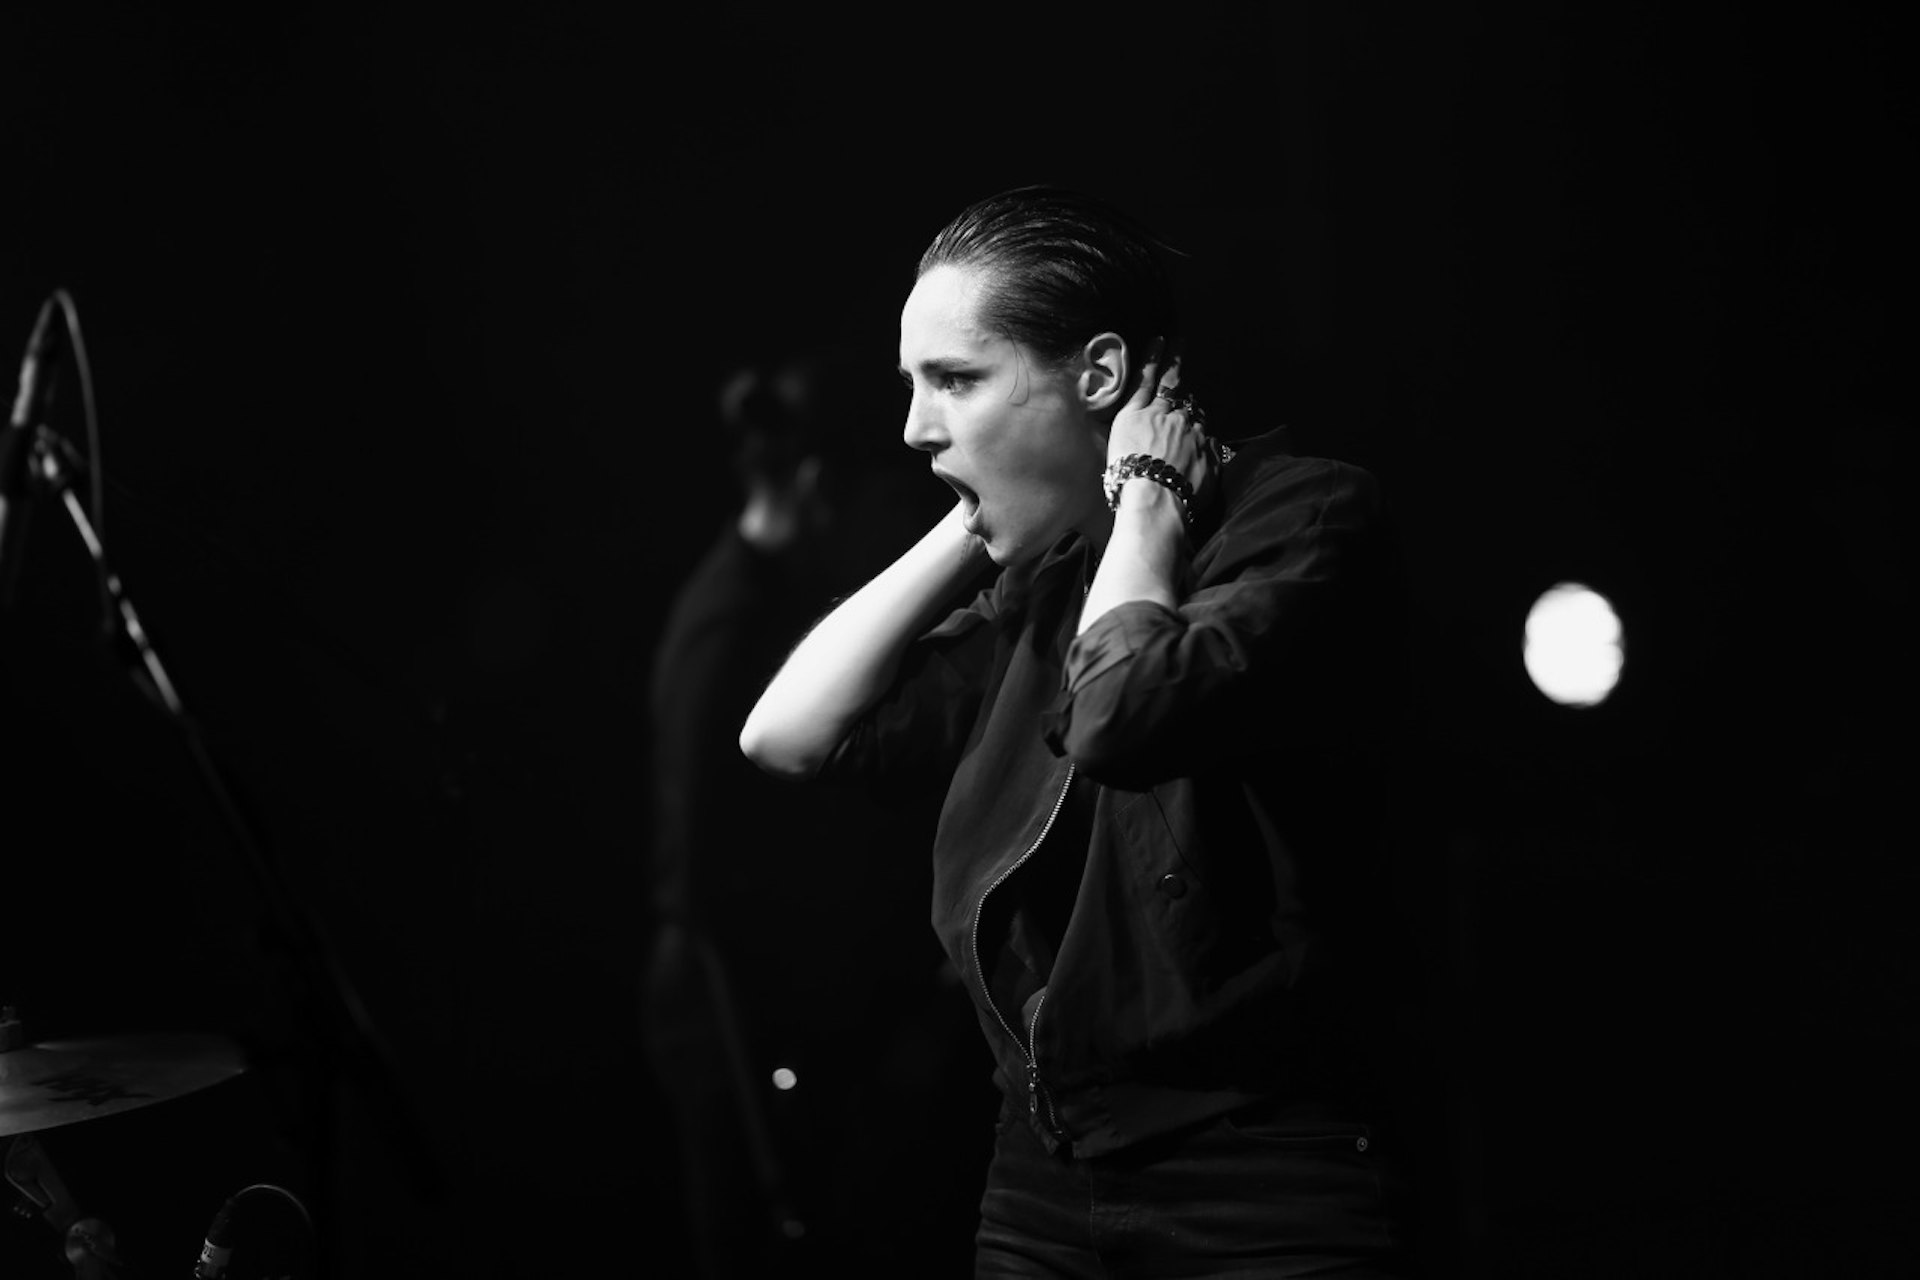 In Pictures: Savages shadowy tour diary